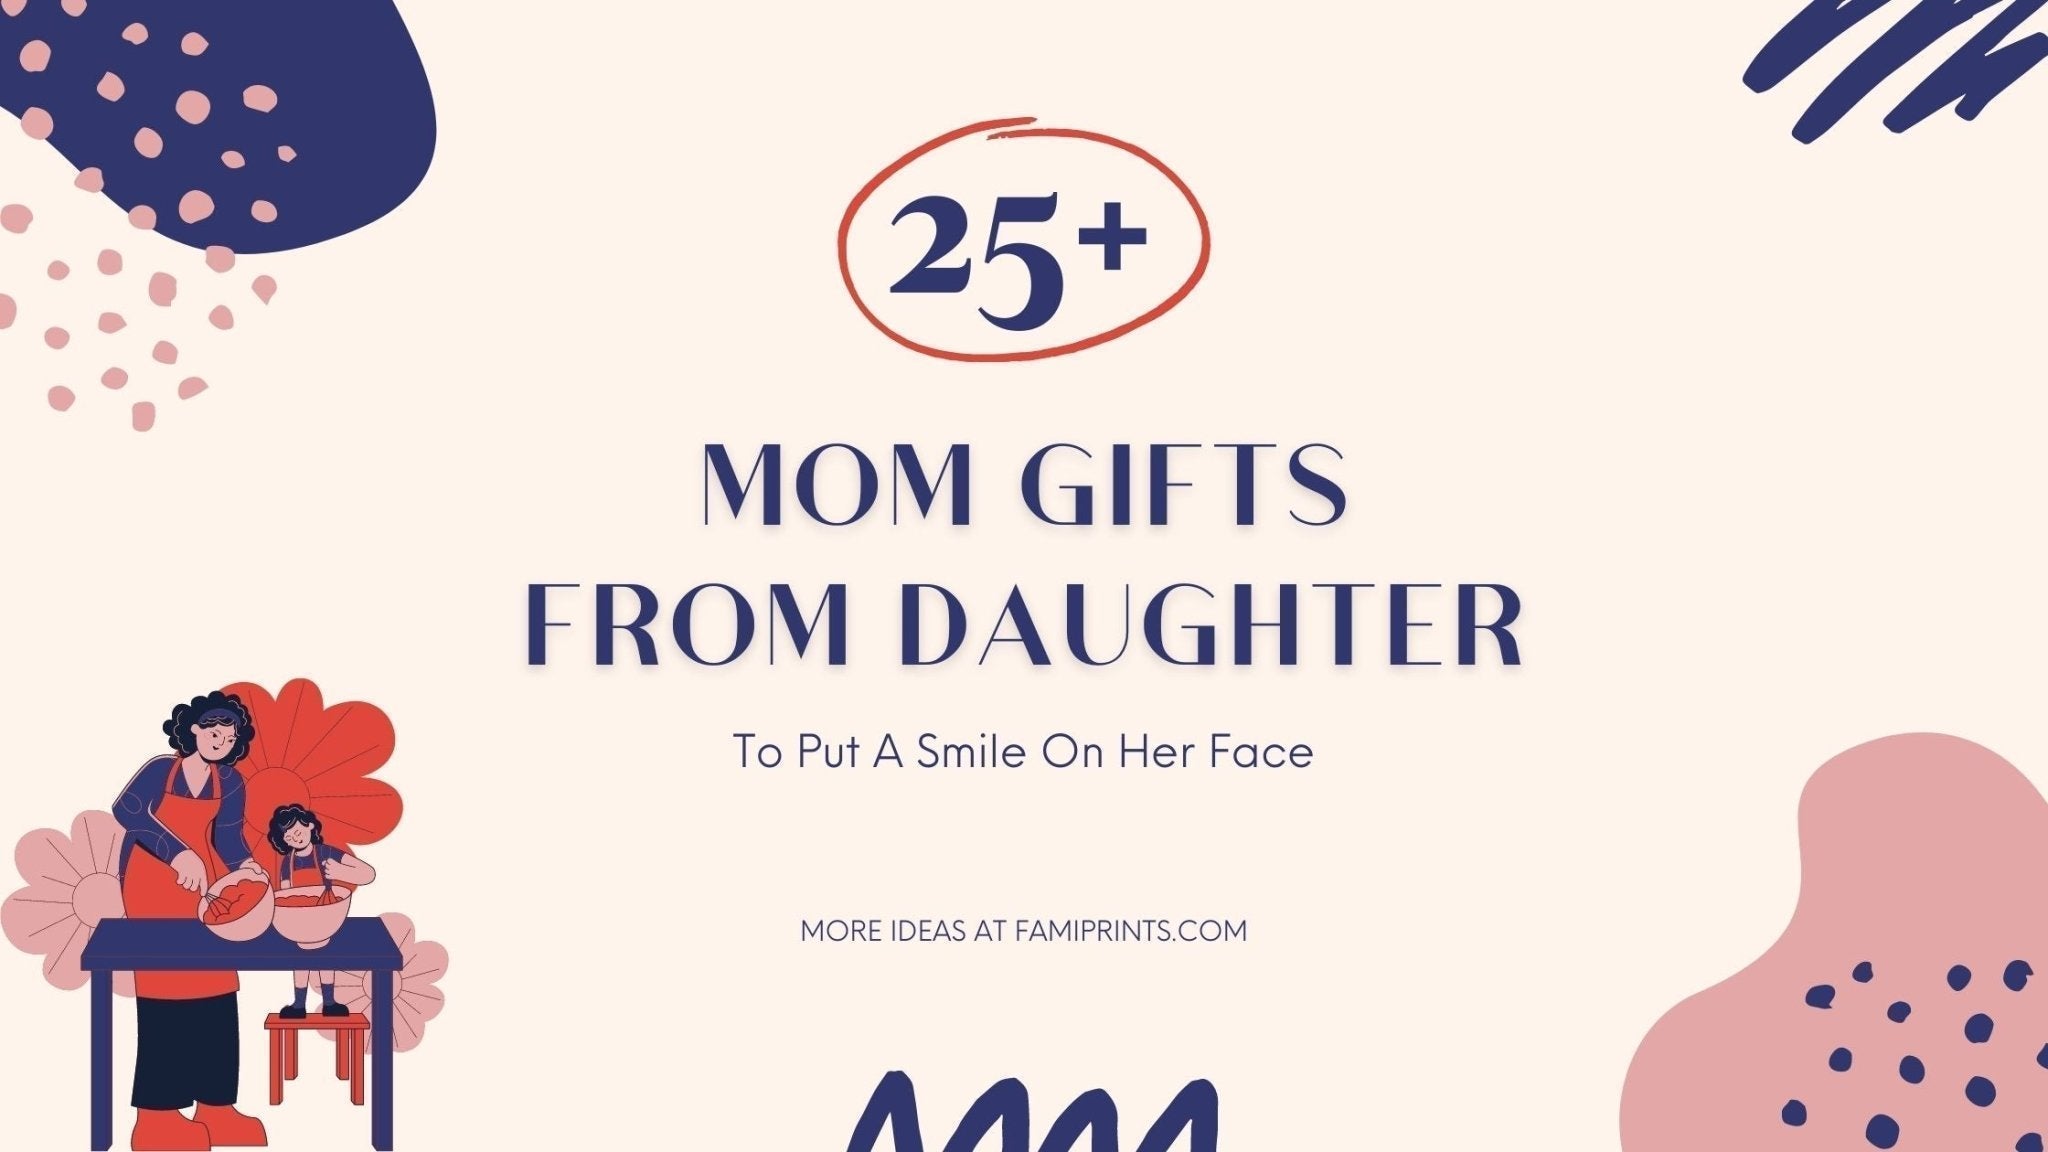 25+ Awesome Mom Gifts From Daughter To Put A Smile On Her Face - FamiPrints | Trending Customizable Family Gifts